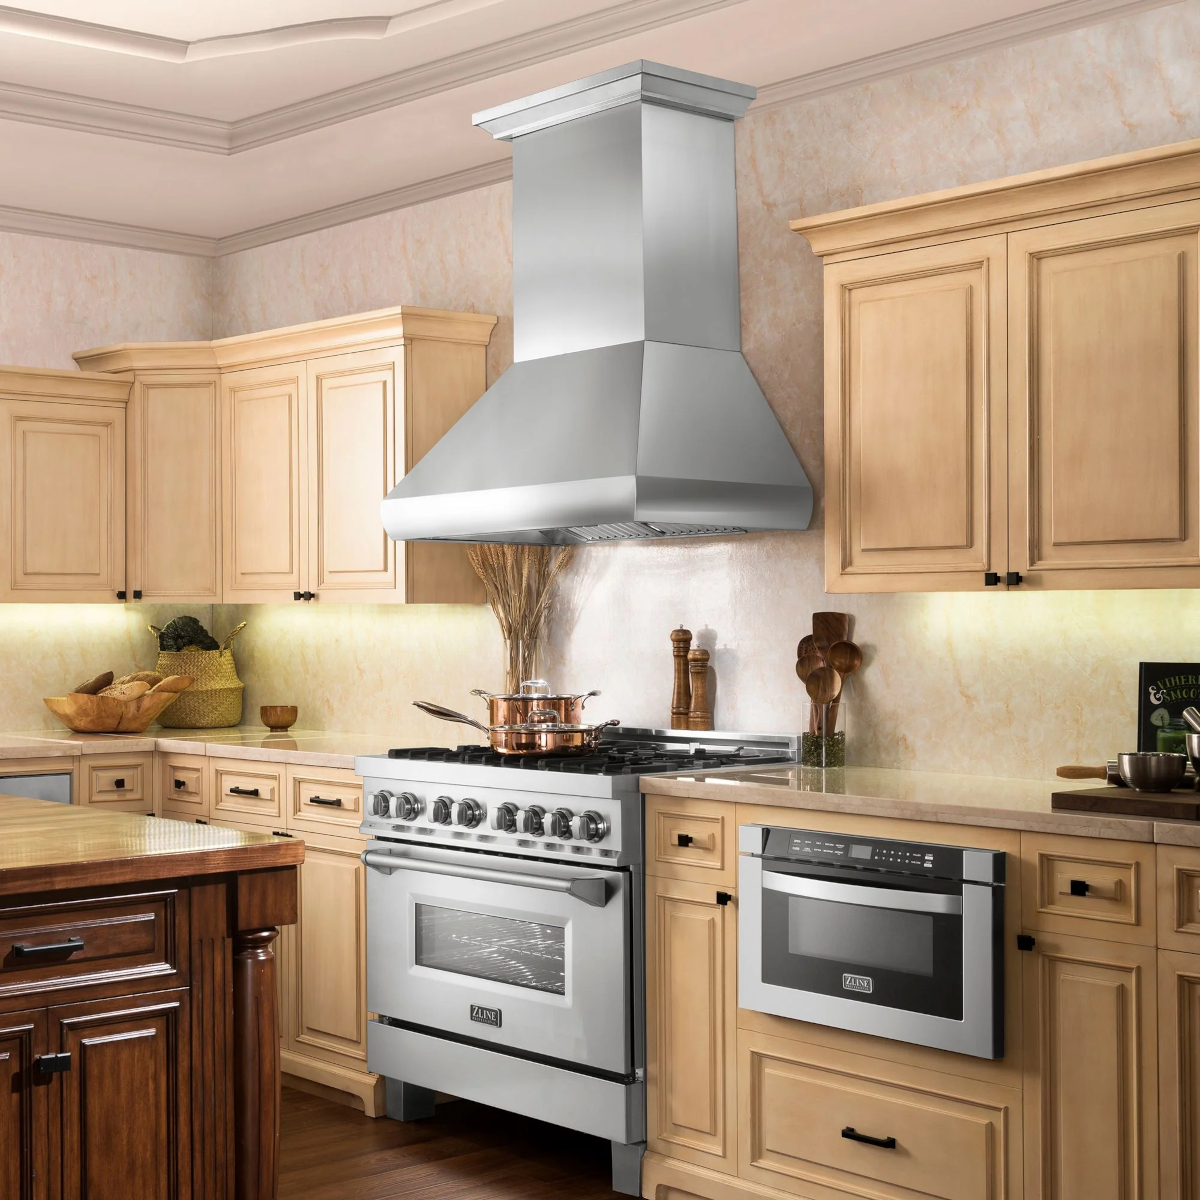 A stainless steel range hood in a kitchen with light-colored wood cabinets.